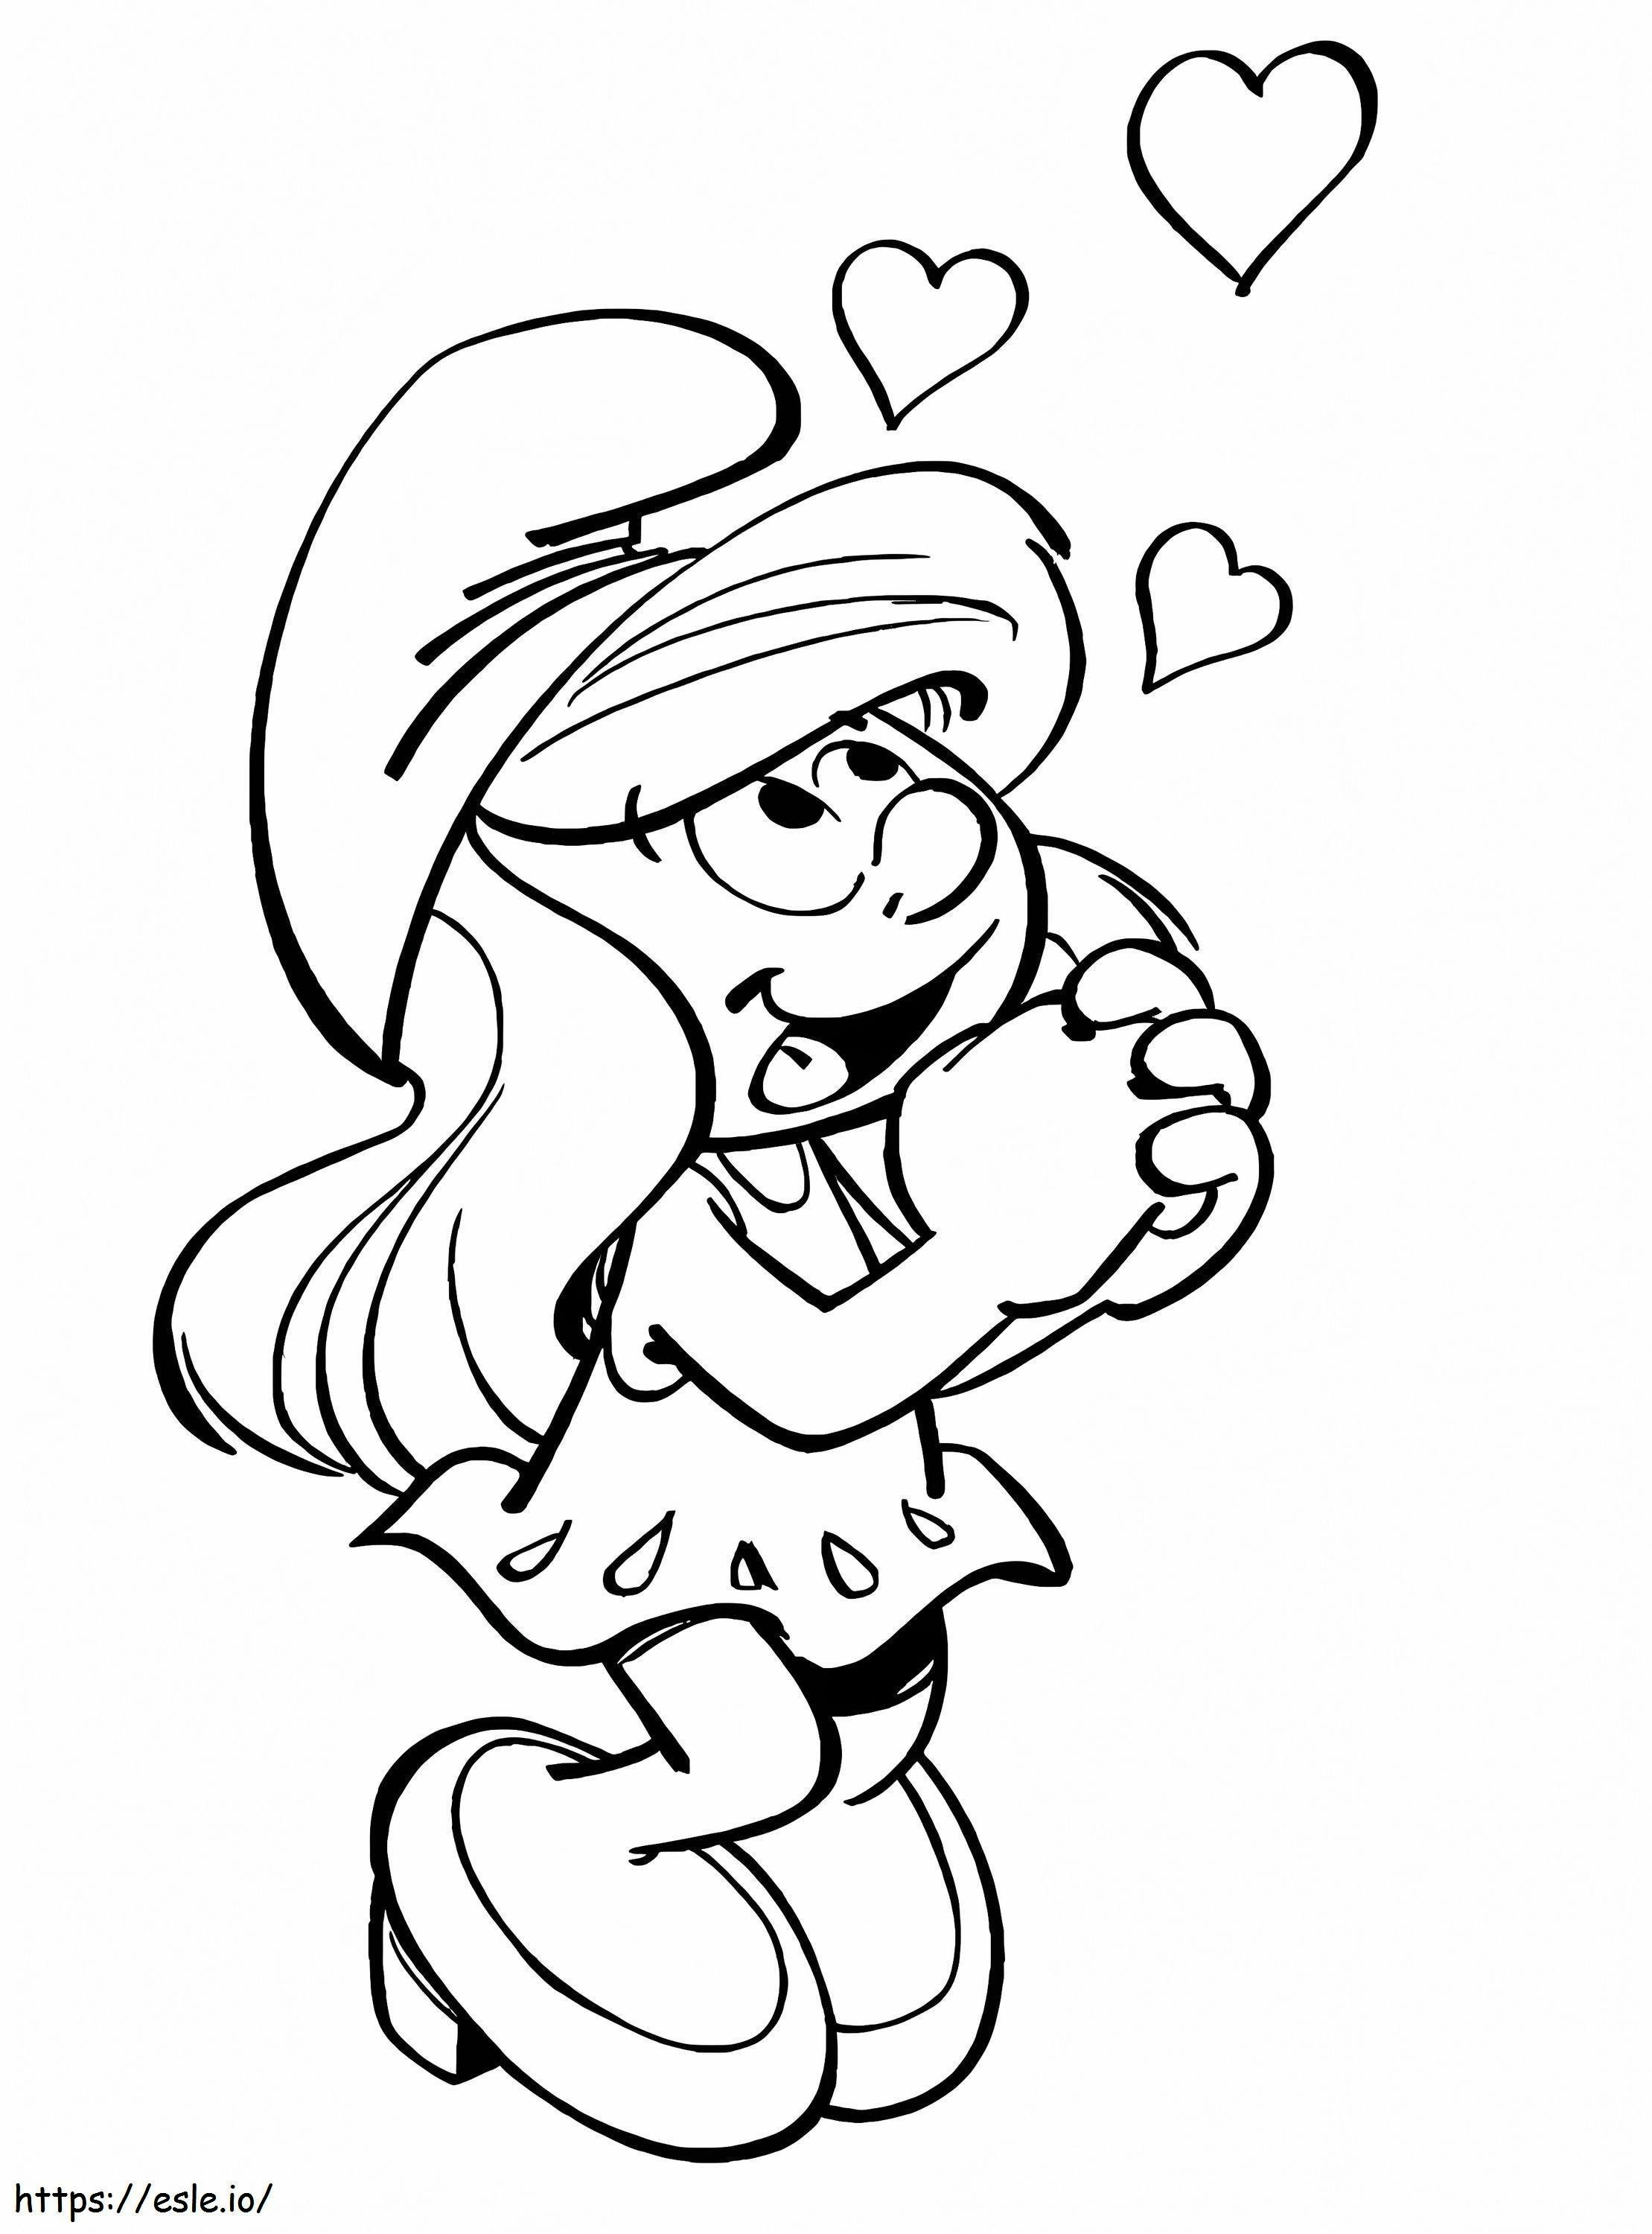 Lovely Smurfette coloring page